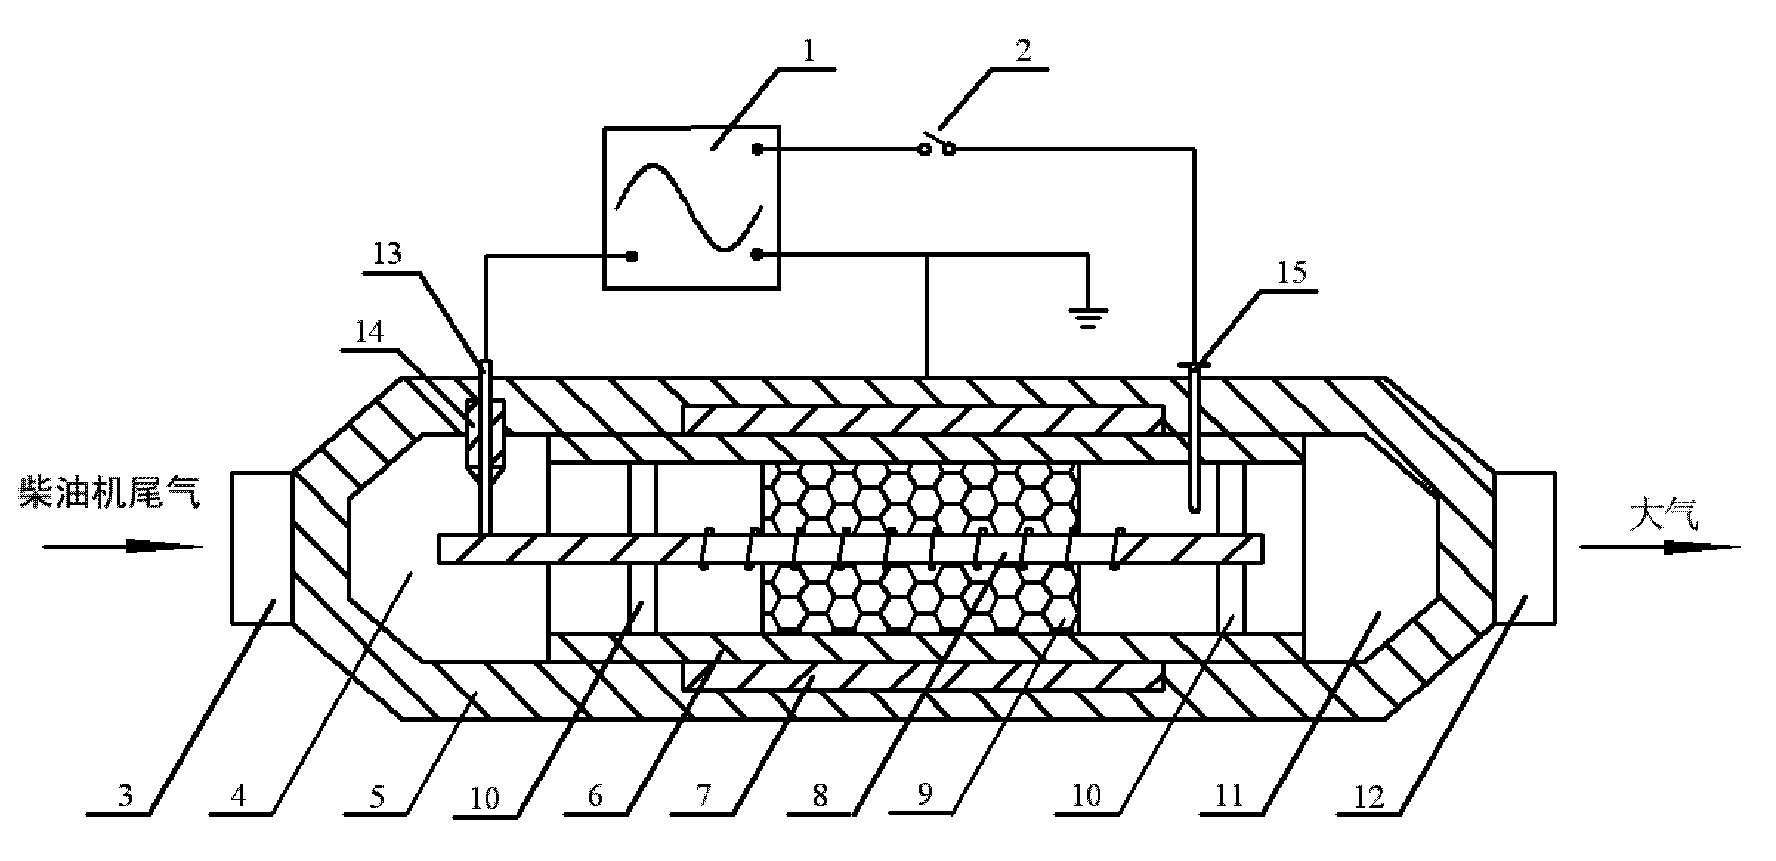 Integral reactor of dielectric barrier discharge coupling catalyst for removing NOx in diesel engine